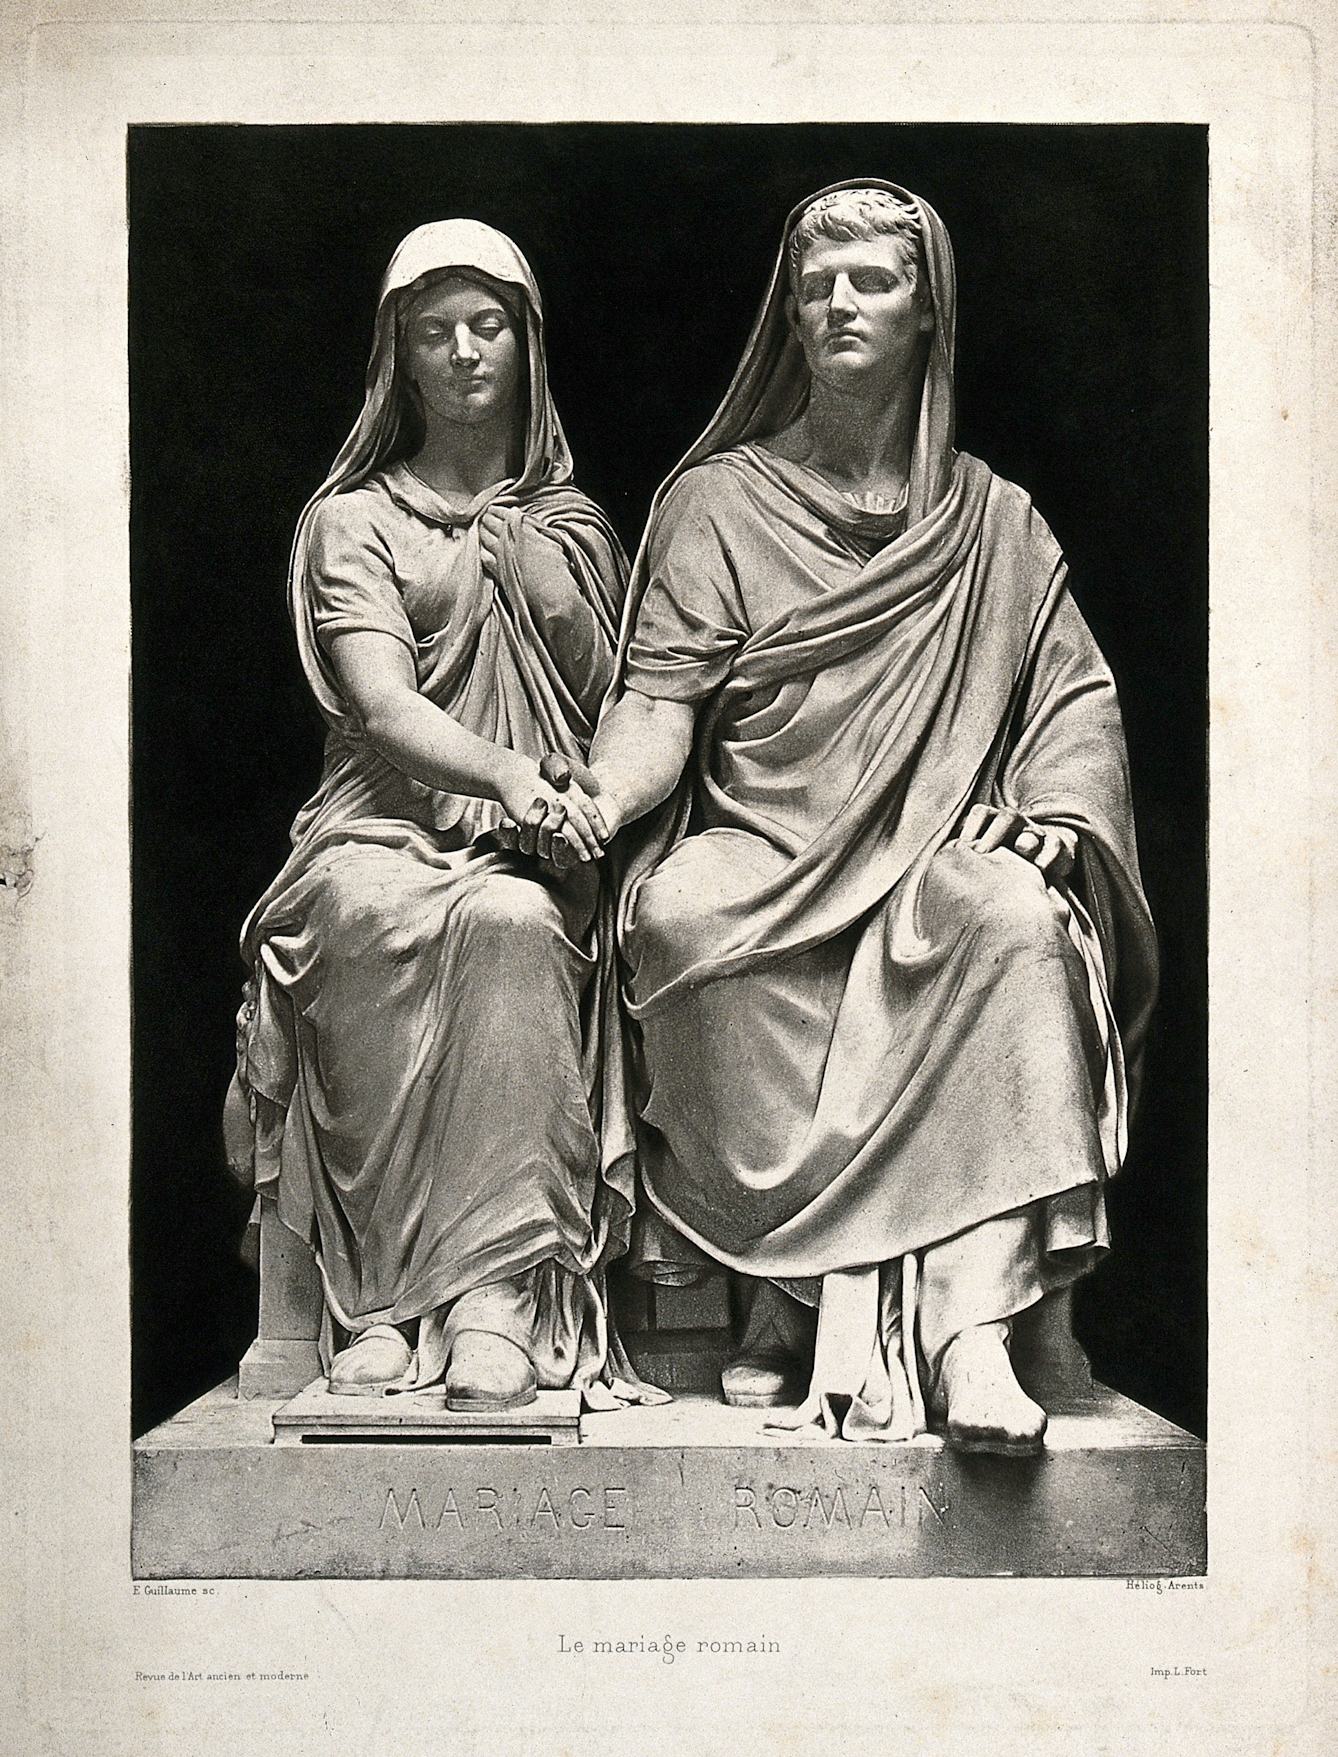 Black and white photograph of a seated couple in Roman dress, holding hands.